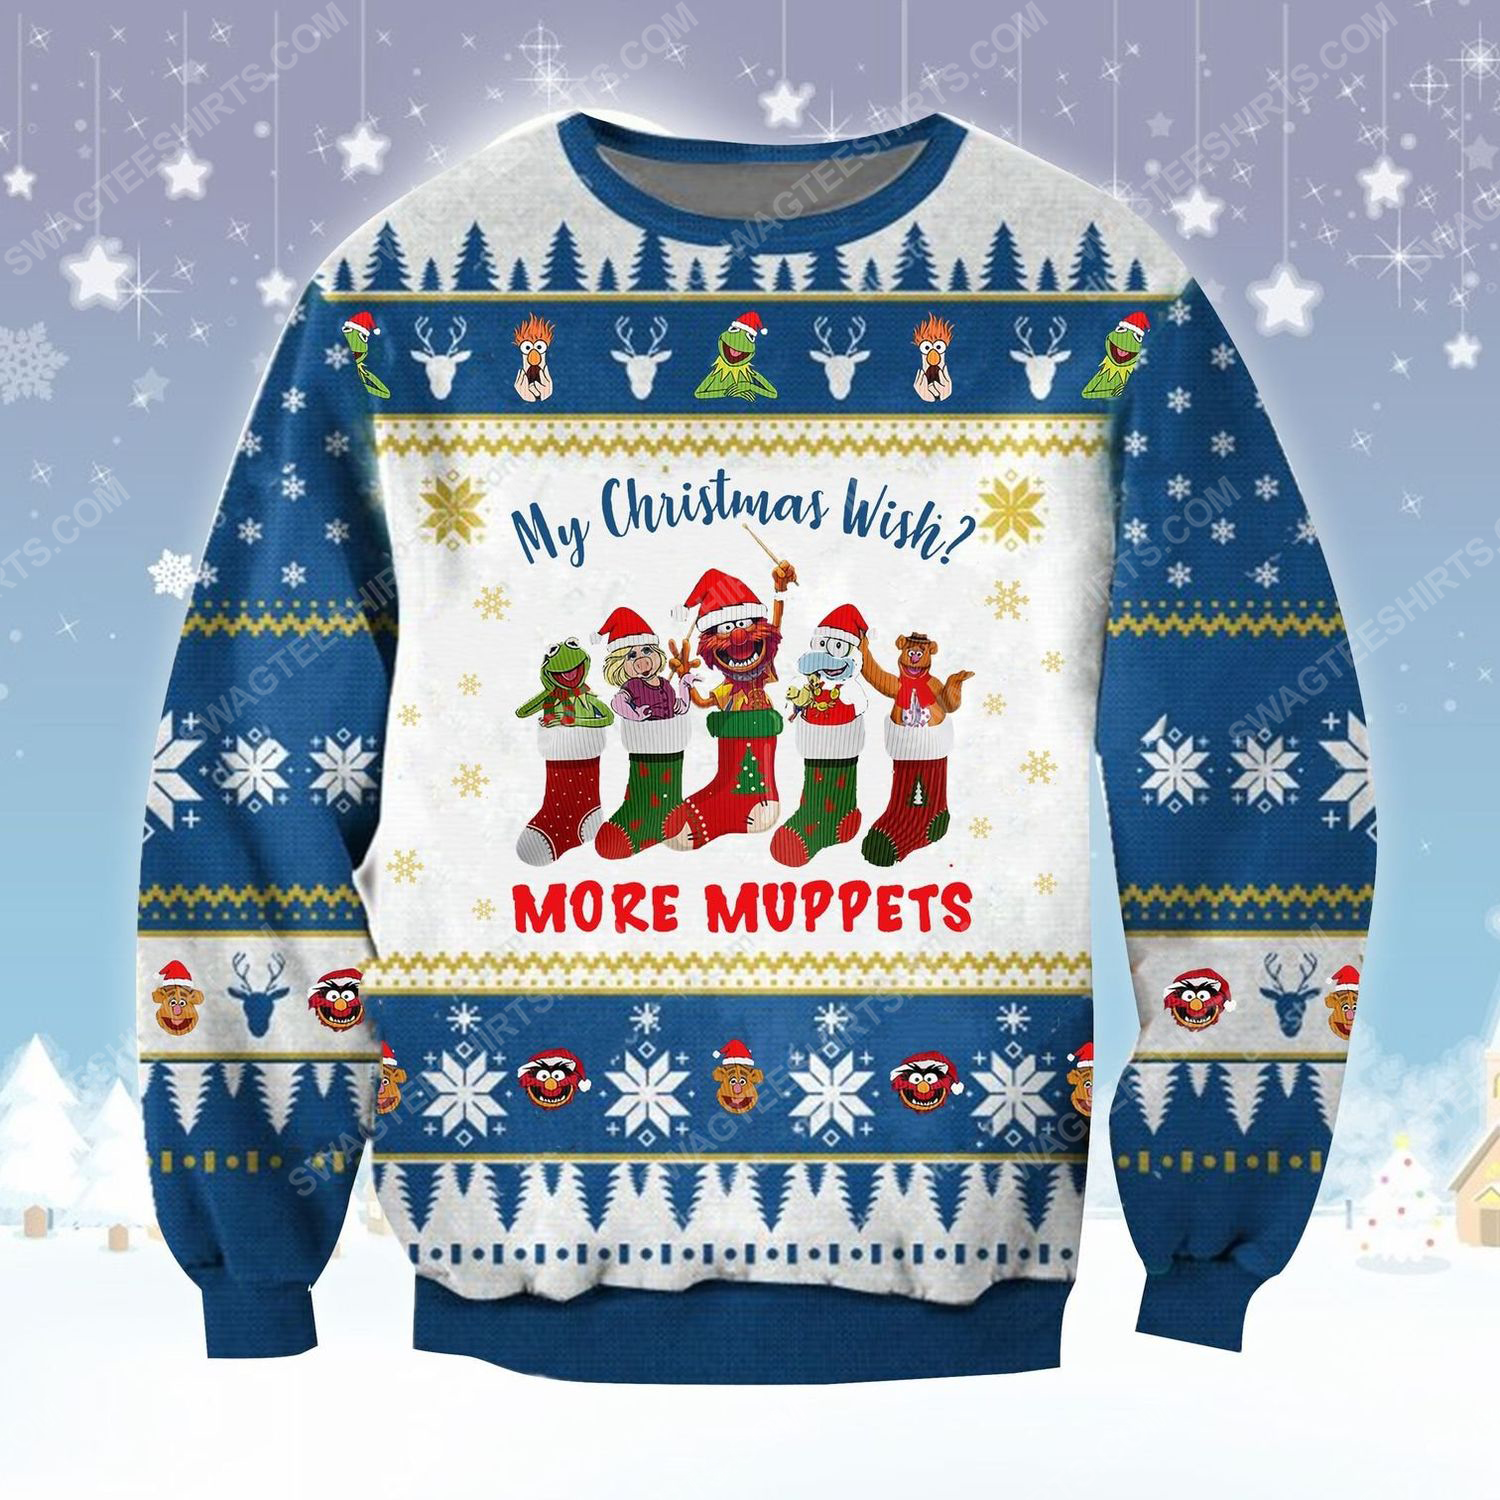 My christmas wish more muppets ugly christmas sweater - Copy (2)